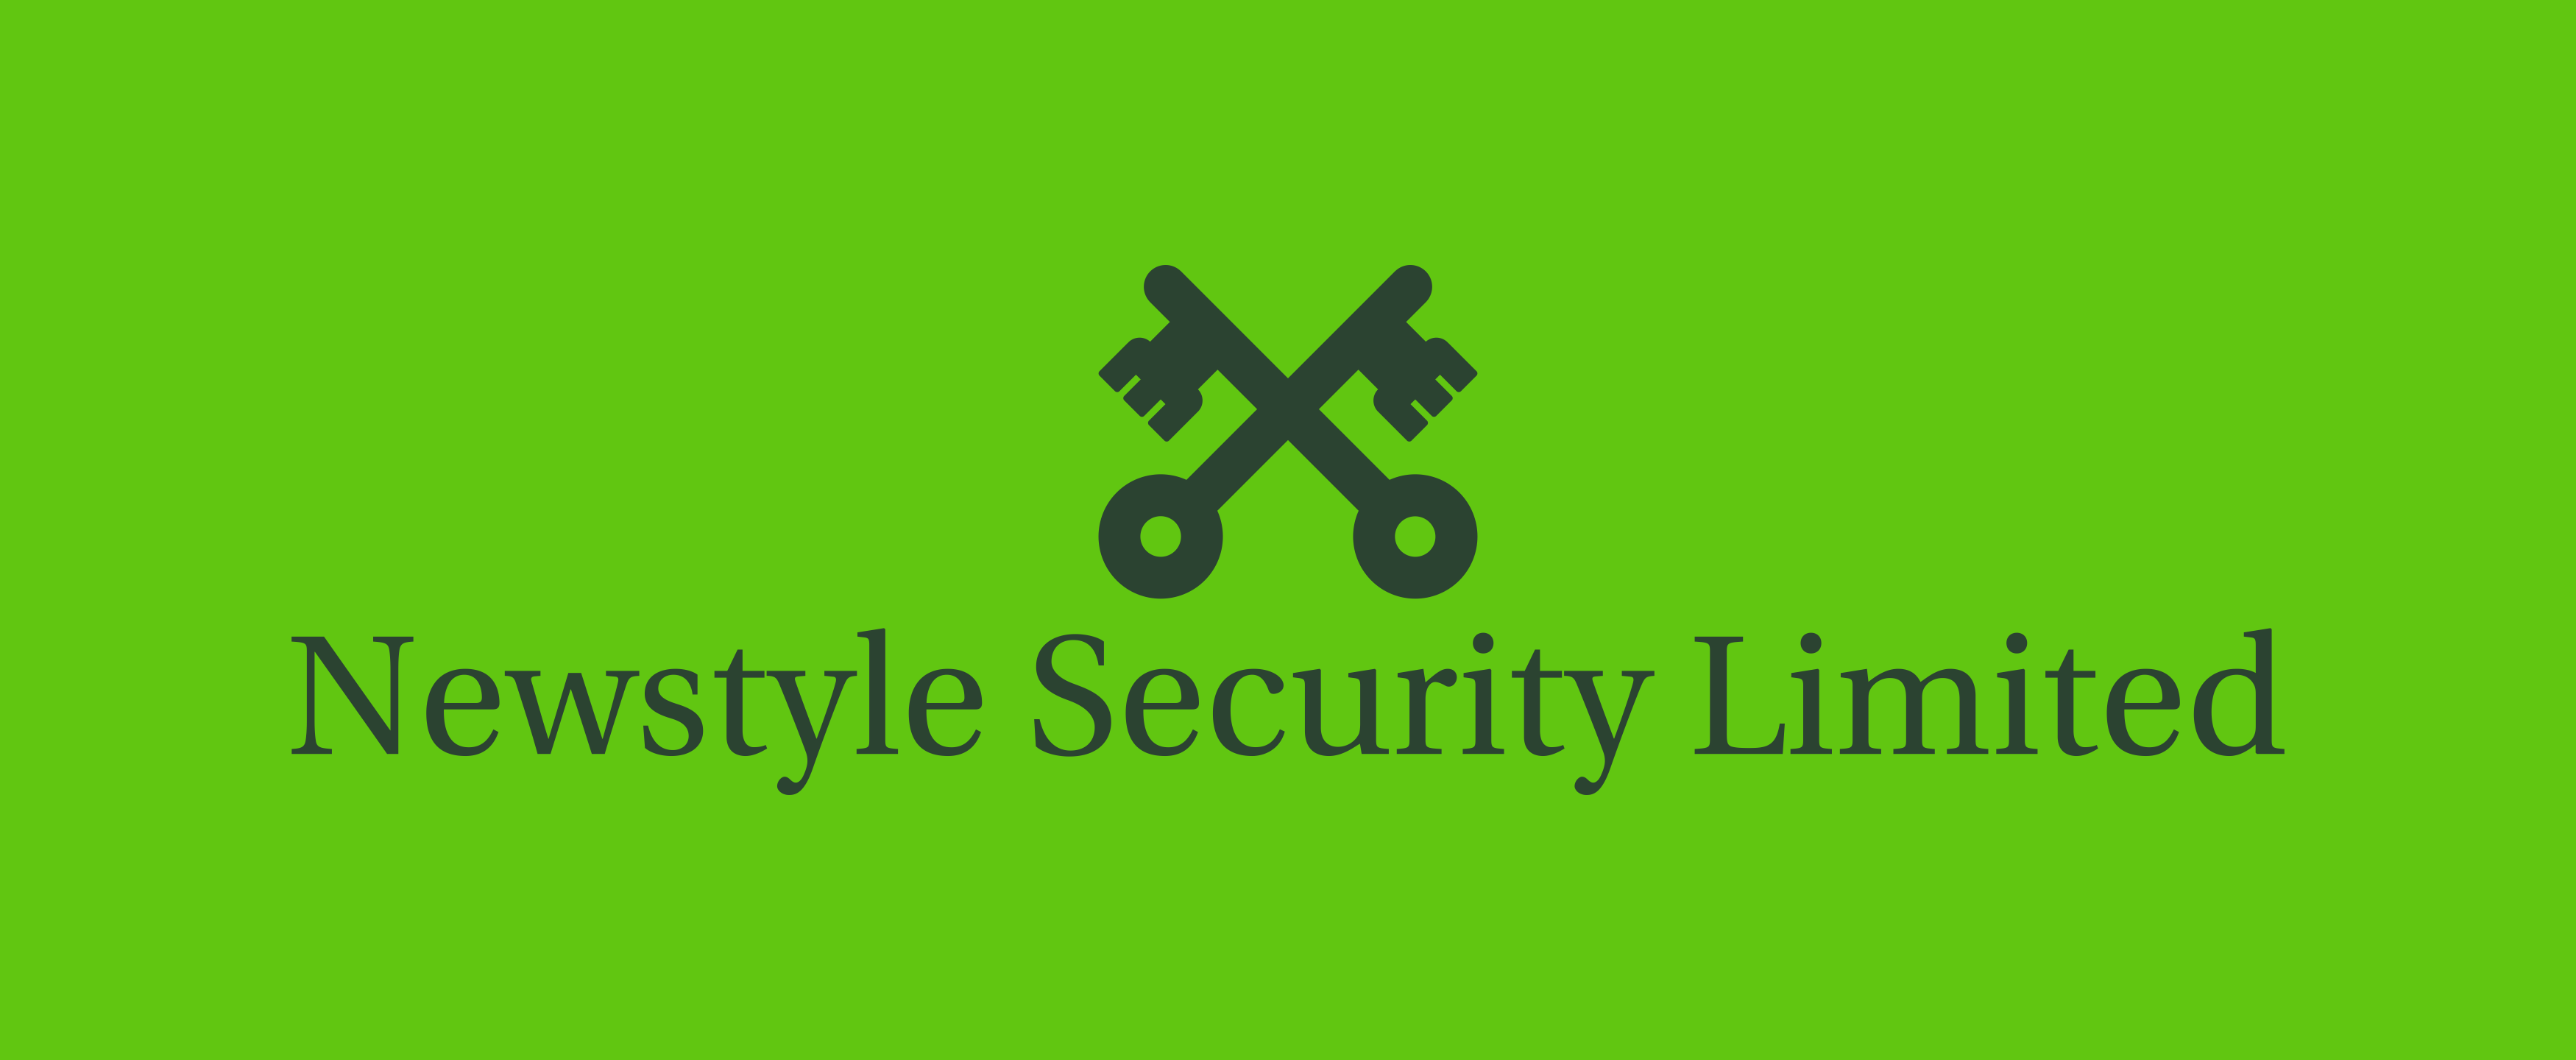 Newstyle Security